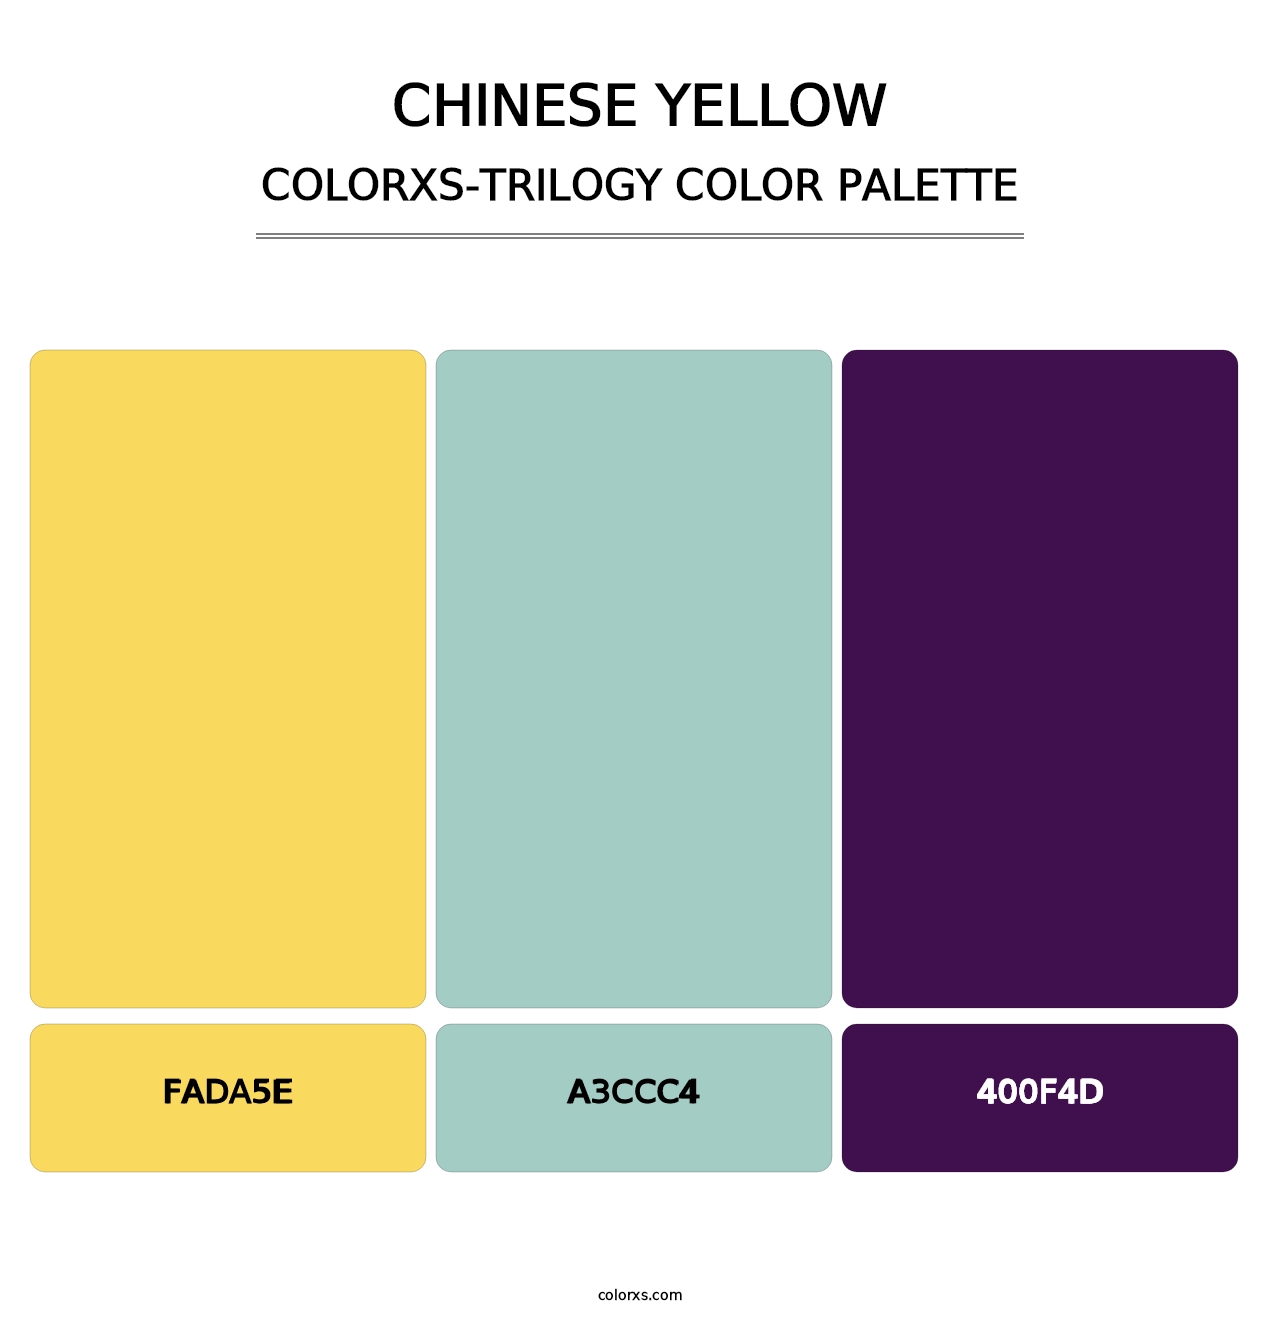 Chinese Yellow - Colorxs Trilogy Palette